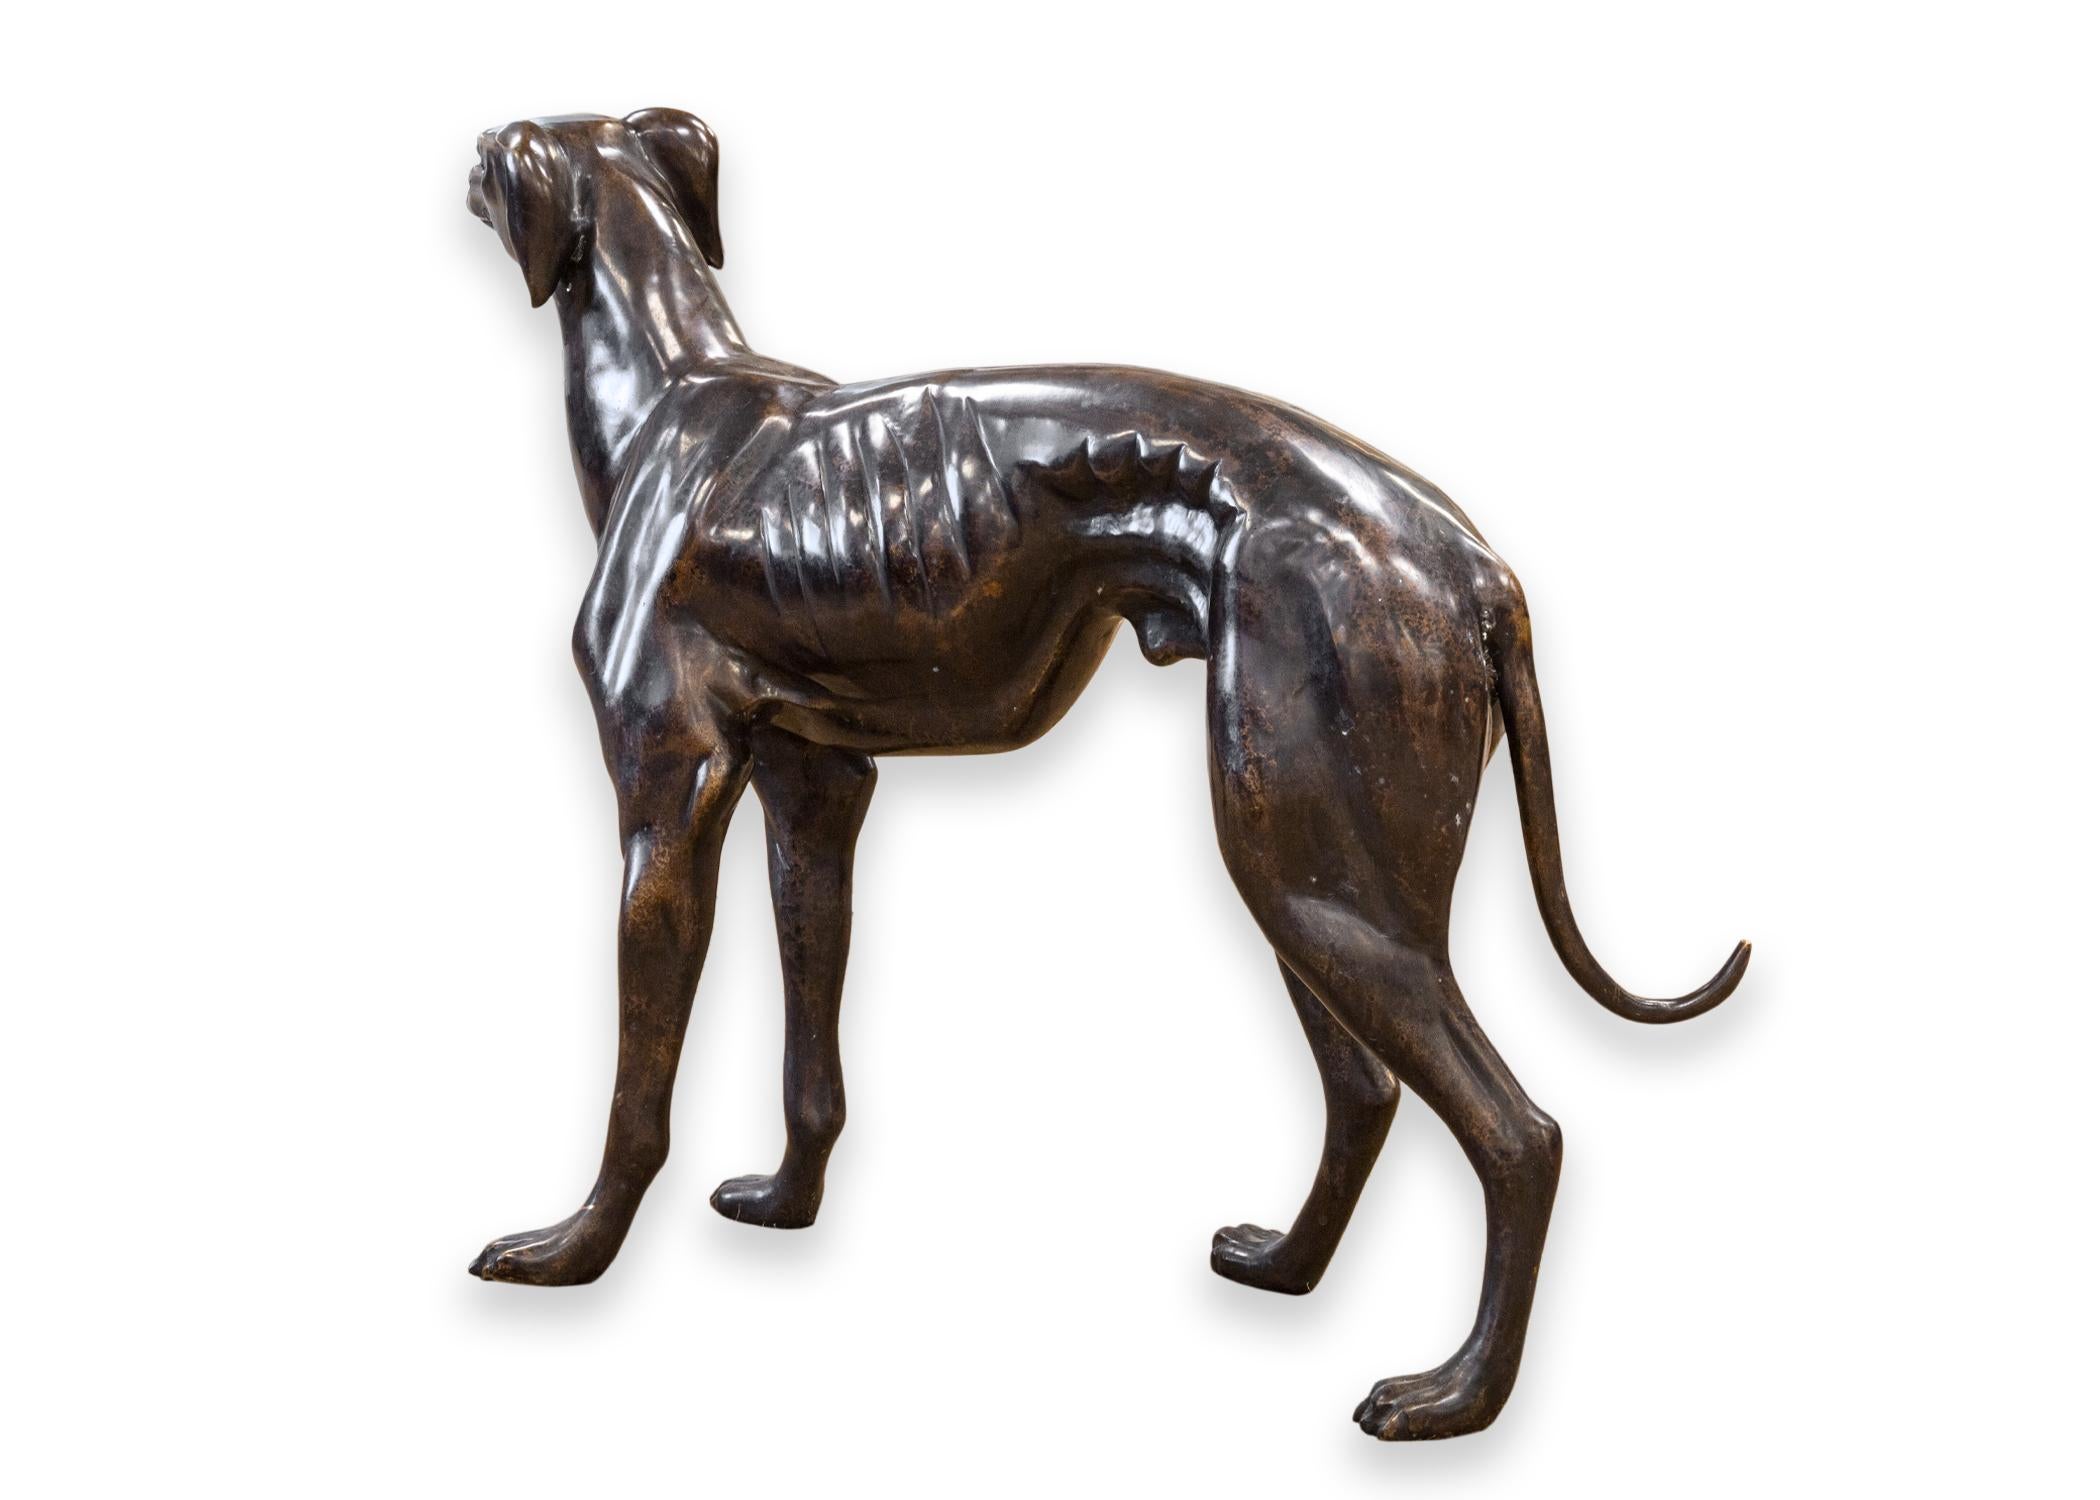 A bronze whippet or greyhound dog sculpture. A lovely little life-sized sculpture that is perfect for any canine lover. This piece is beautifully made, with tons of detail, and a real-to-life scale. This piece is in very good condition. It has a tag